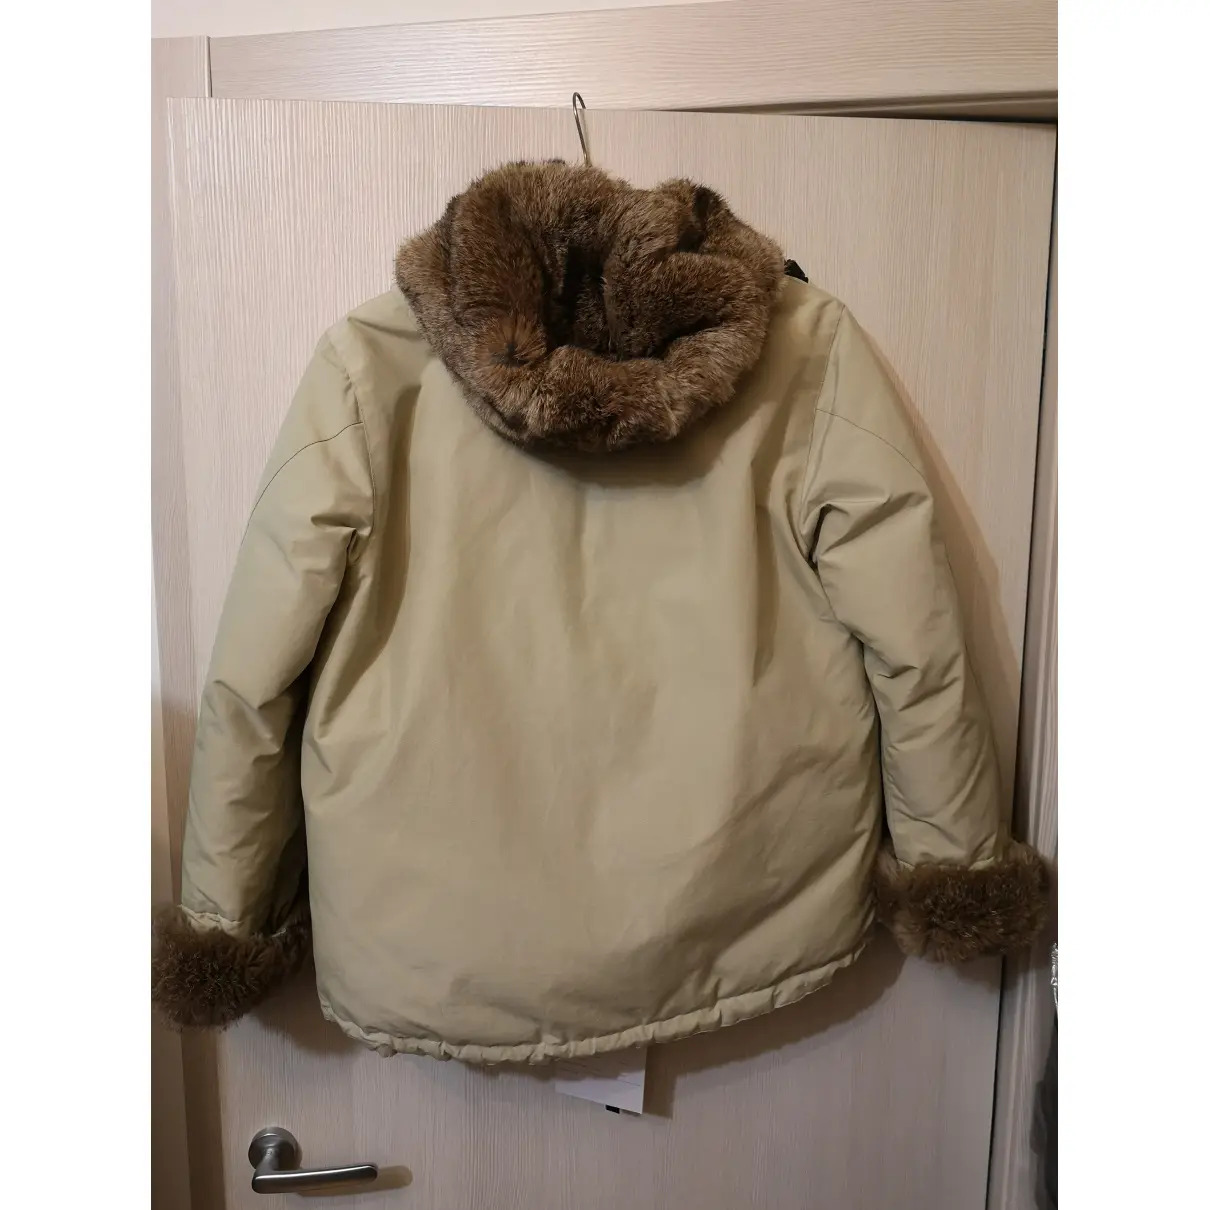 Buy Woolrich Caban online